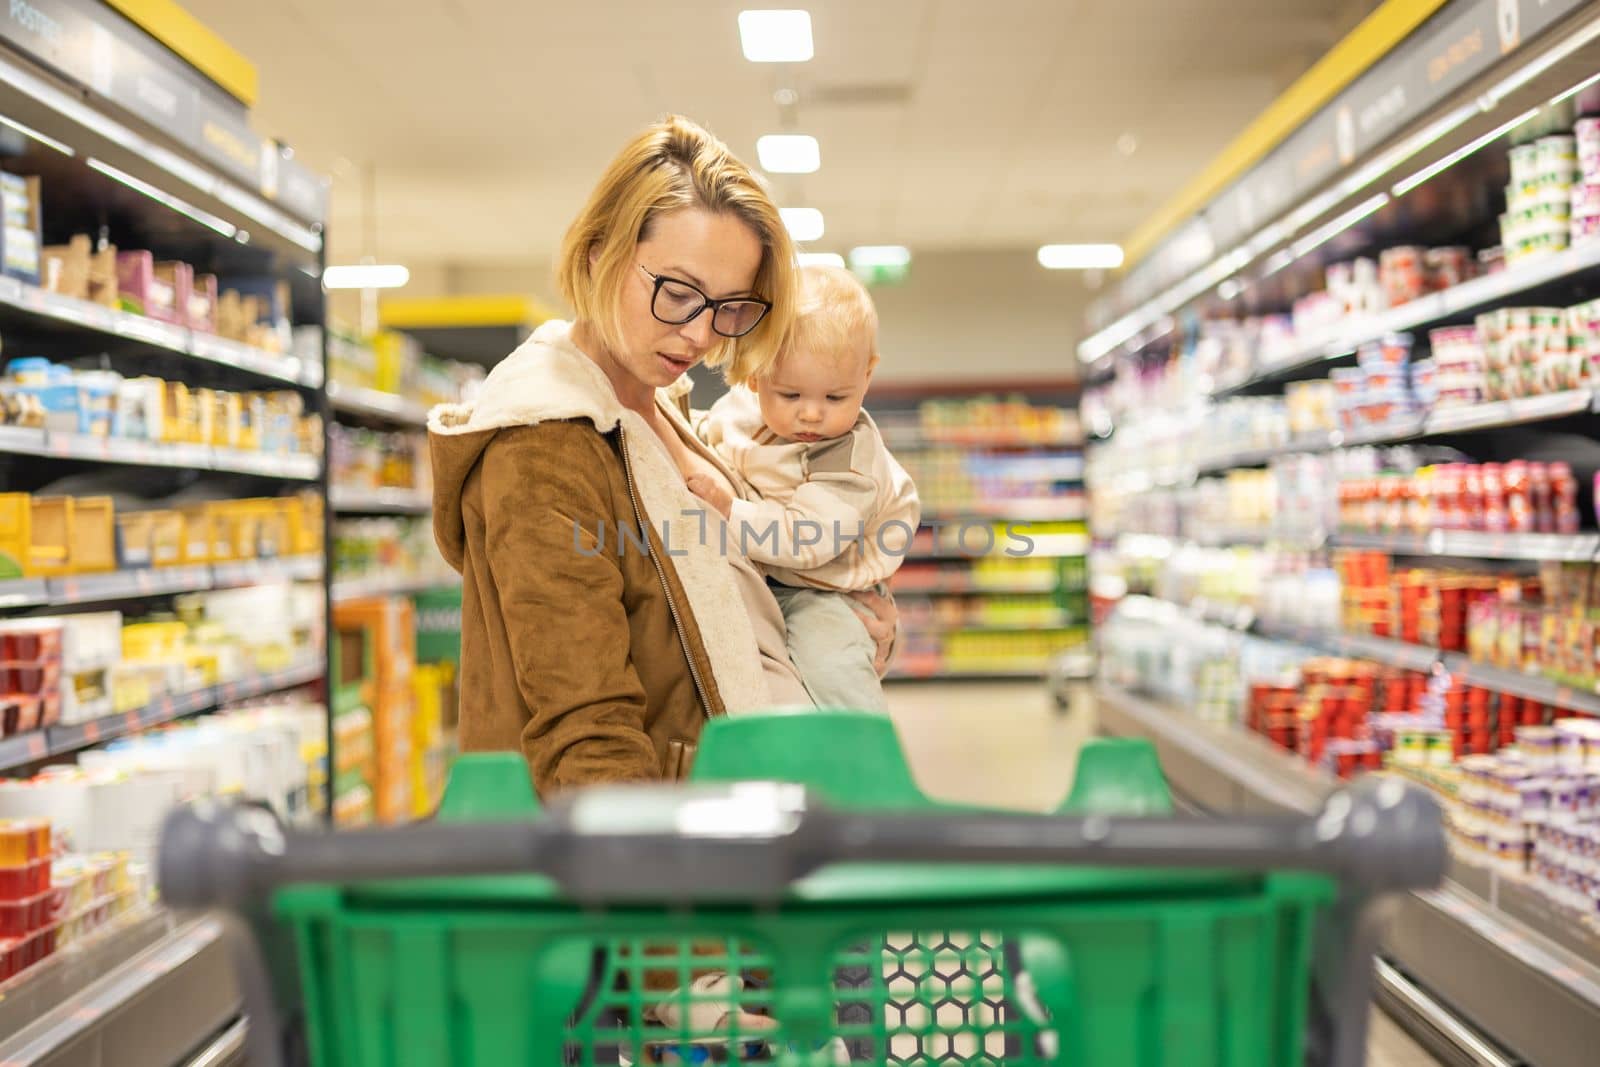 Mother shopping with her infant baby boy child, pushing shopping cart down department aisle in supermarket grocery store